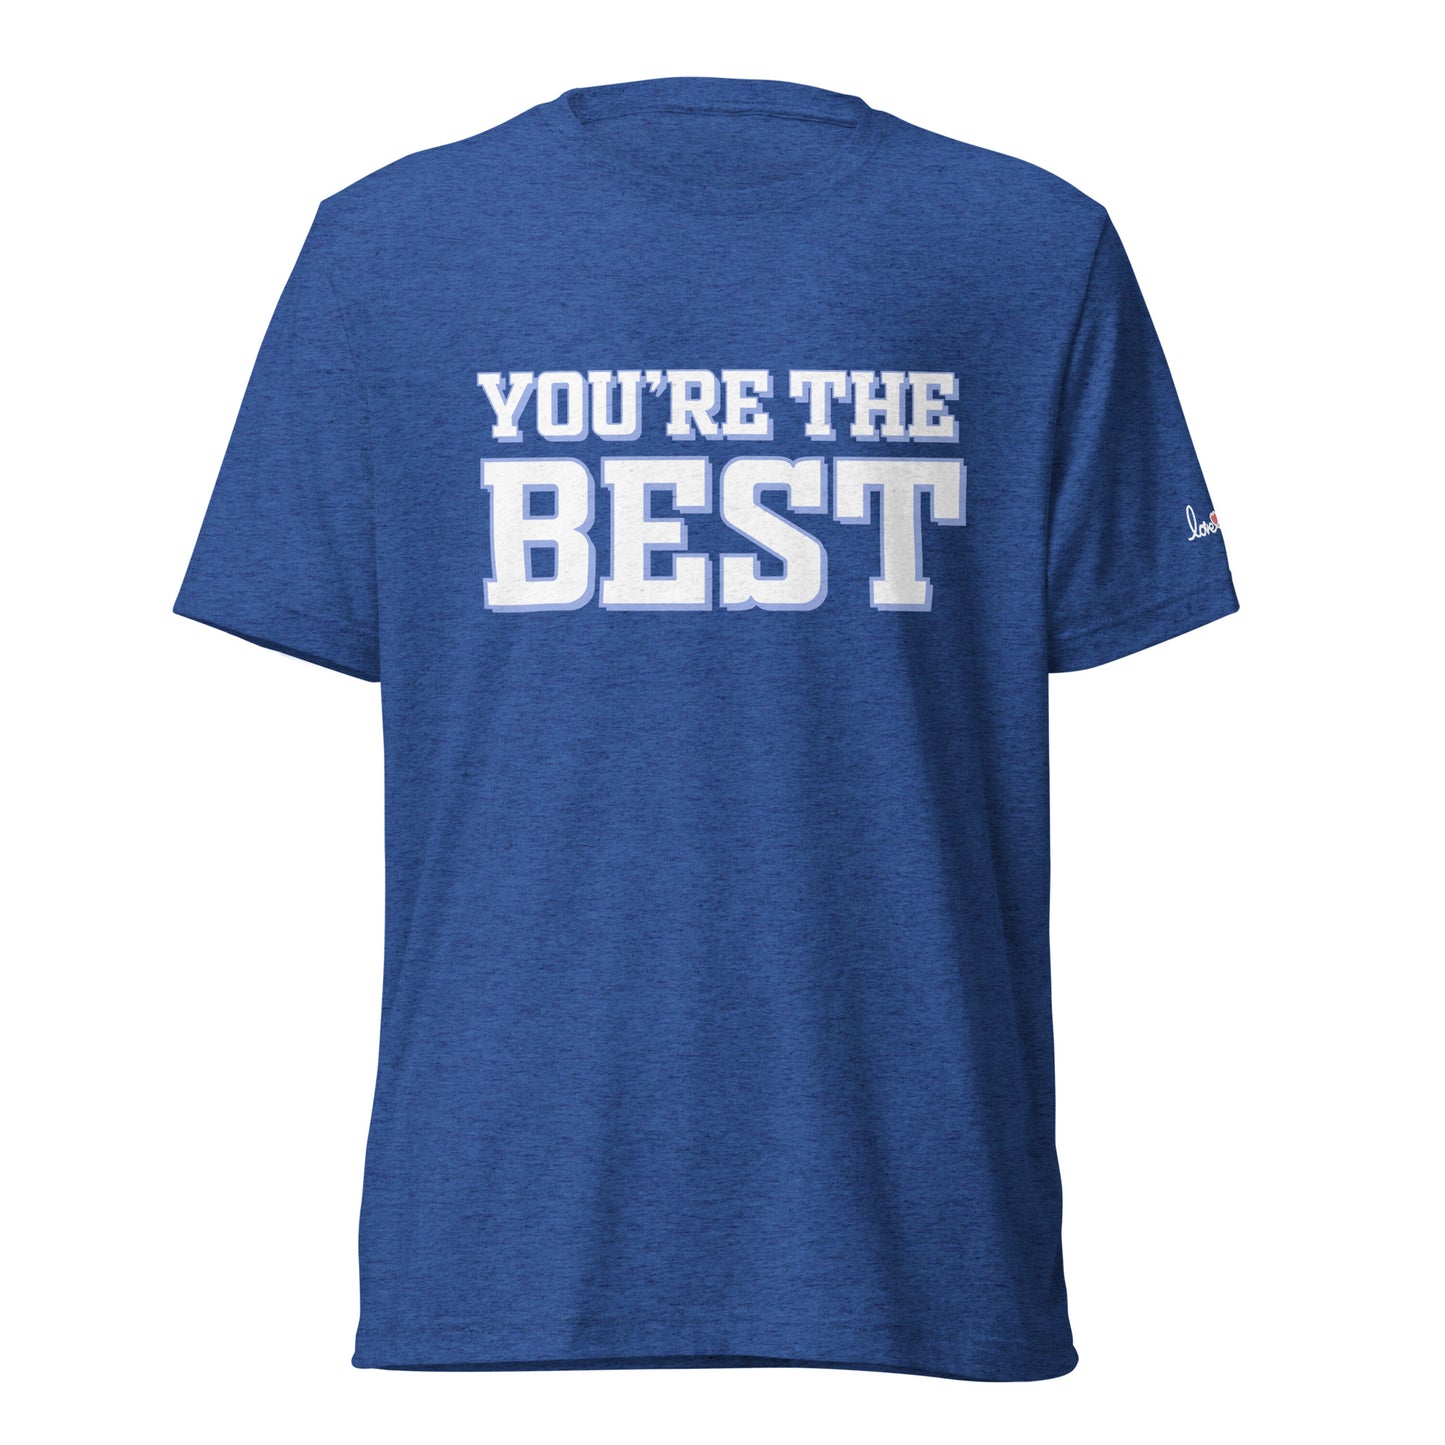 You're the best t-shirt